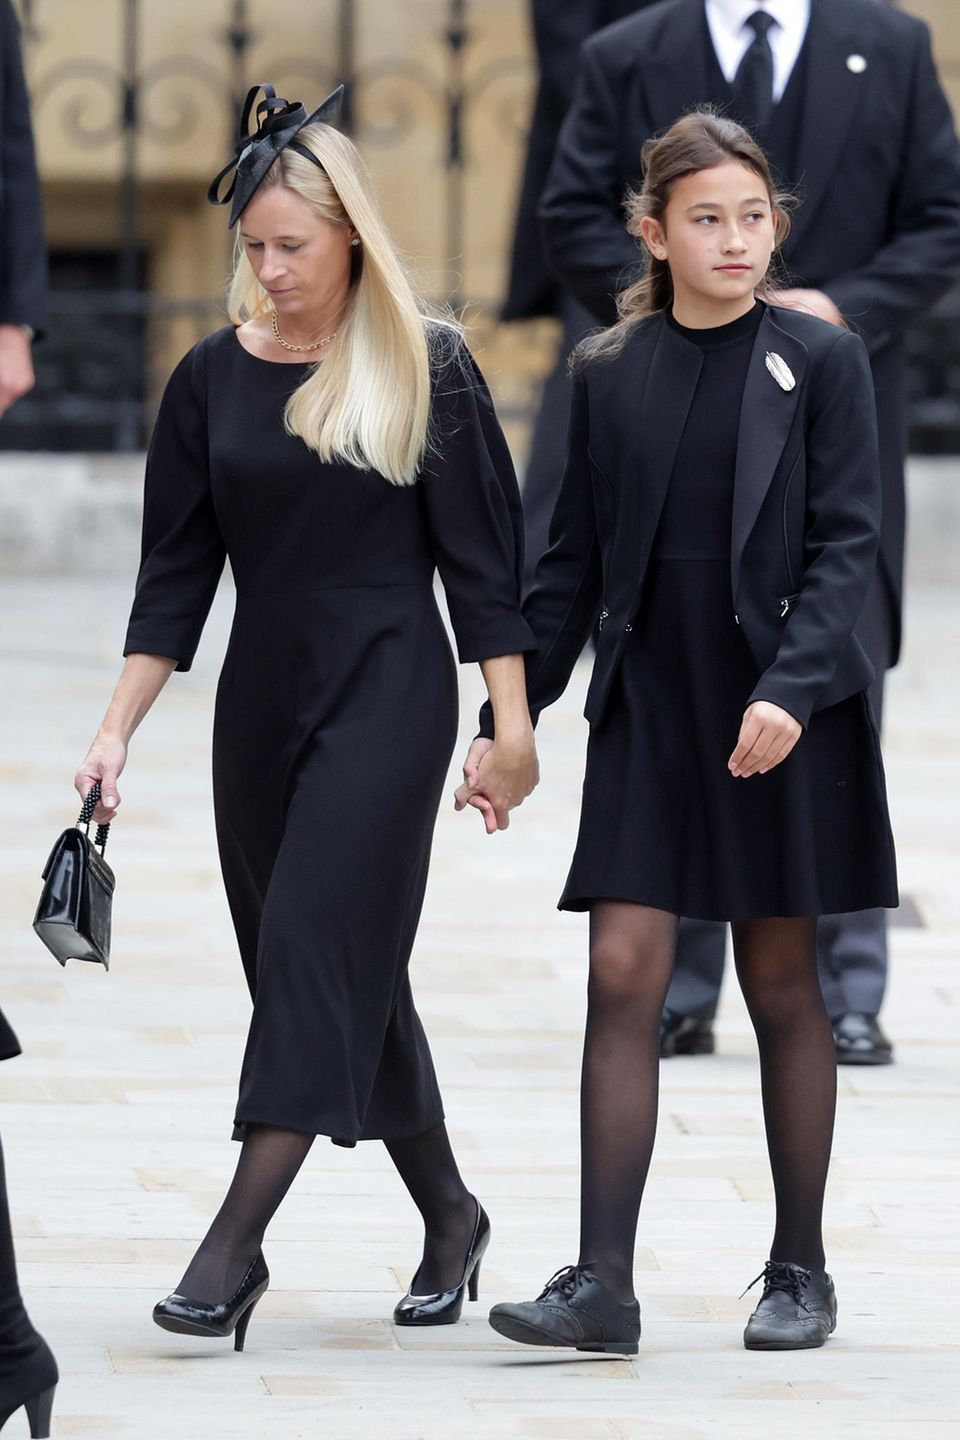 Lady Davina Lewis and daughter Senna Kowhai Lewis attend Queen Elizabeth's Funeral on September 19, 2022 in London, England.